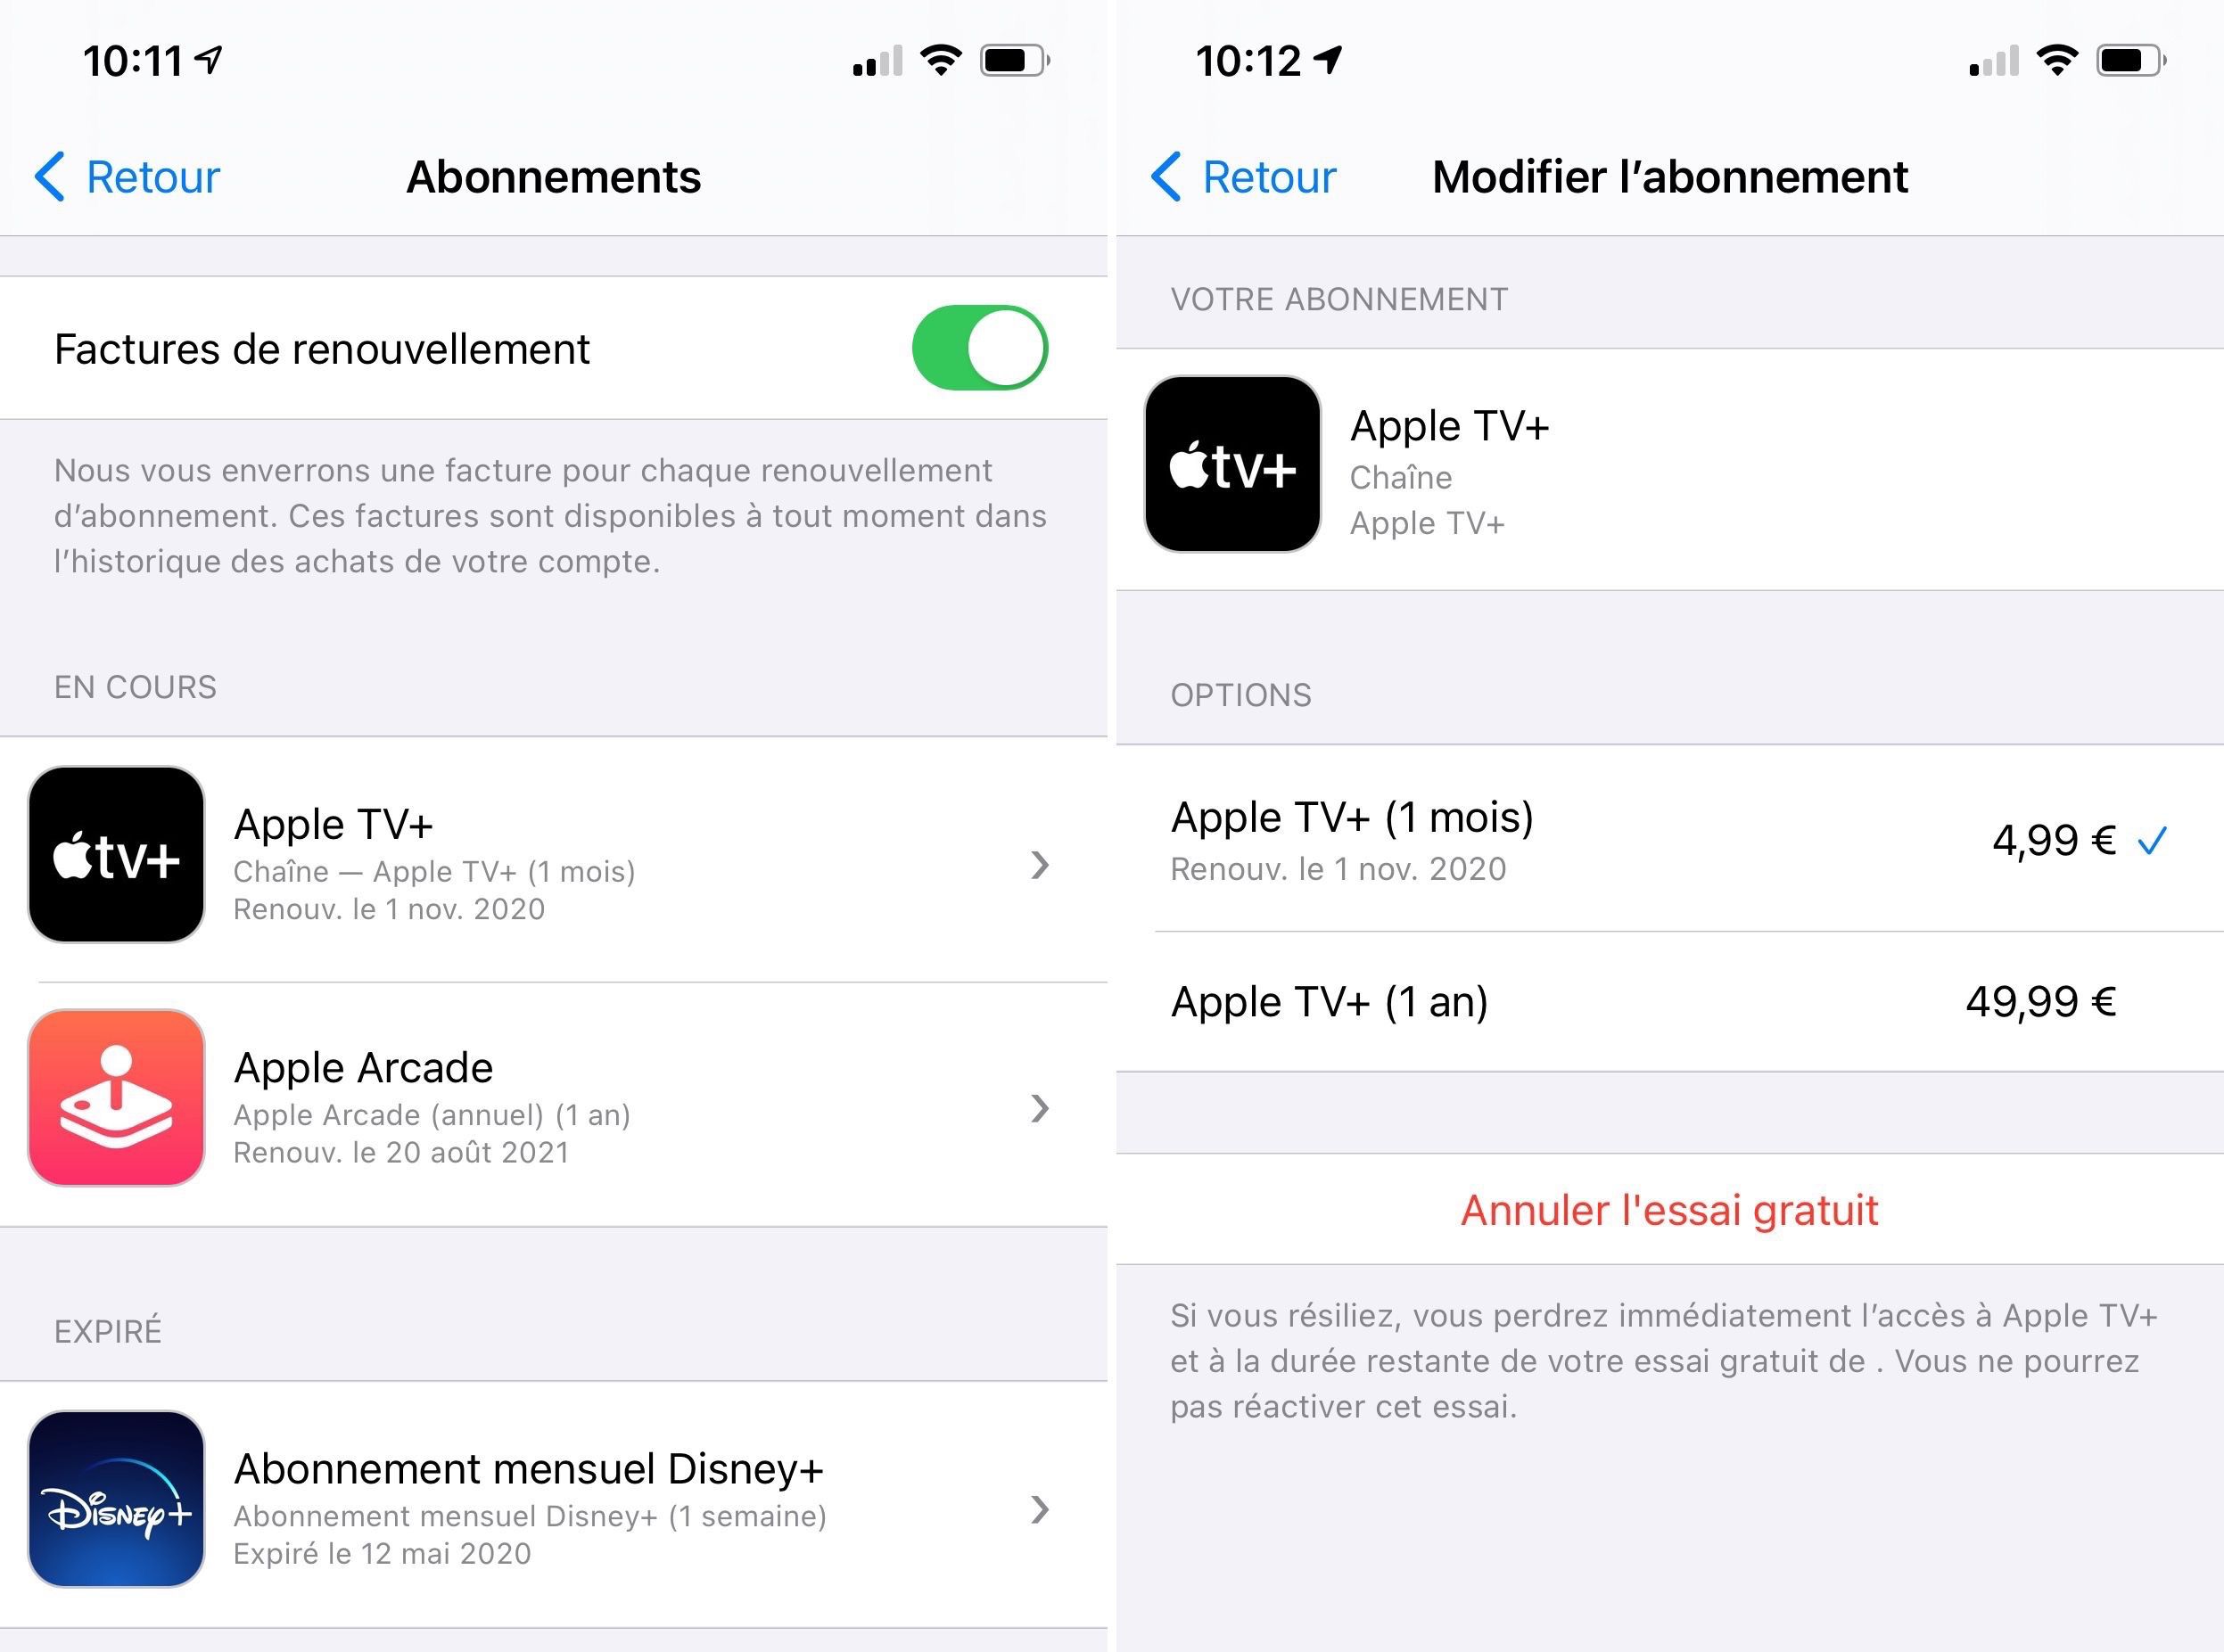 Een evenement klep in beroep gaan Apple TV +: How to Cancel Your Subscription or Pay Less